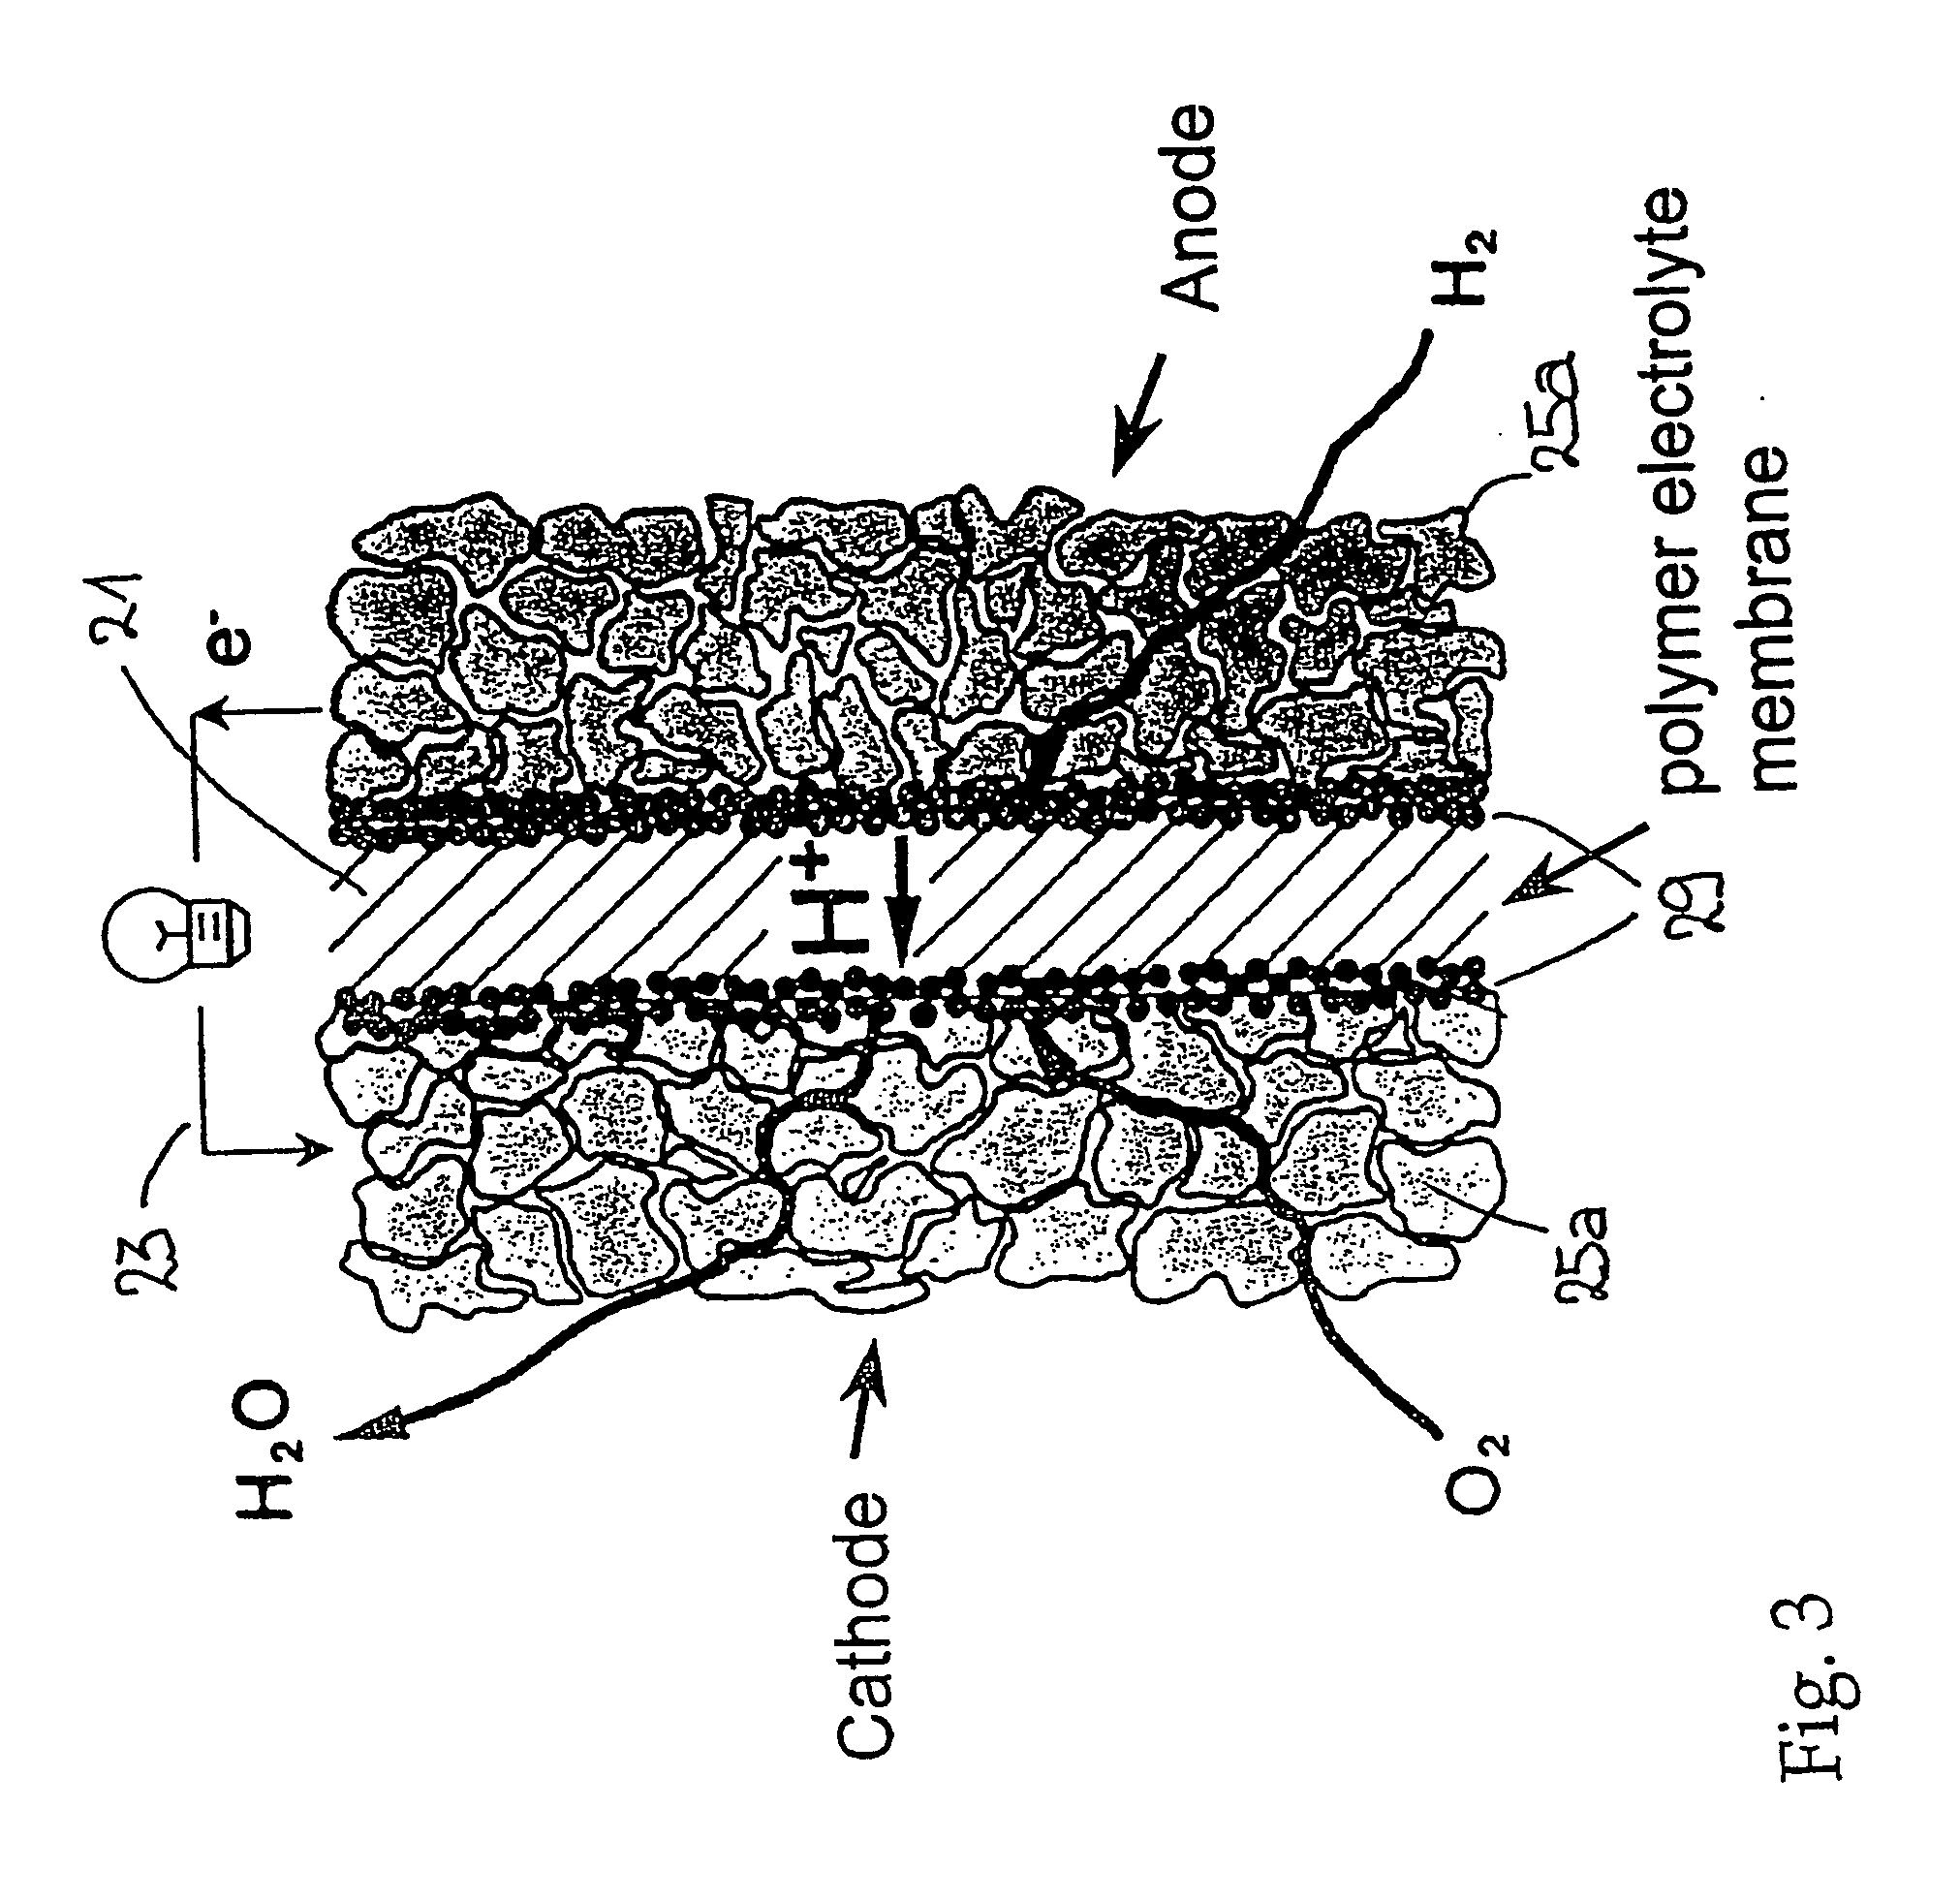 Process to manufacture an ion-permeable and electrically conducting flat material, the material obtained according to the process, and fuel cells